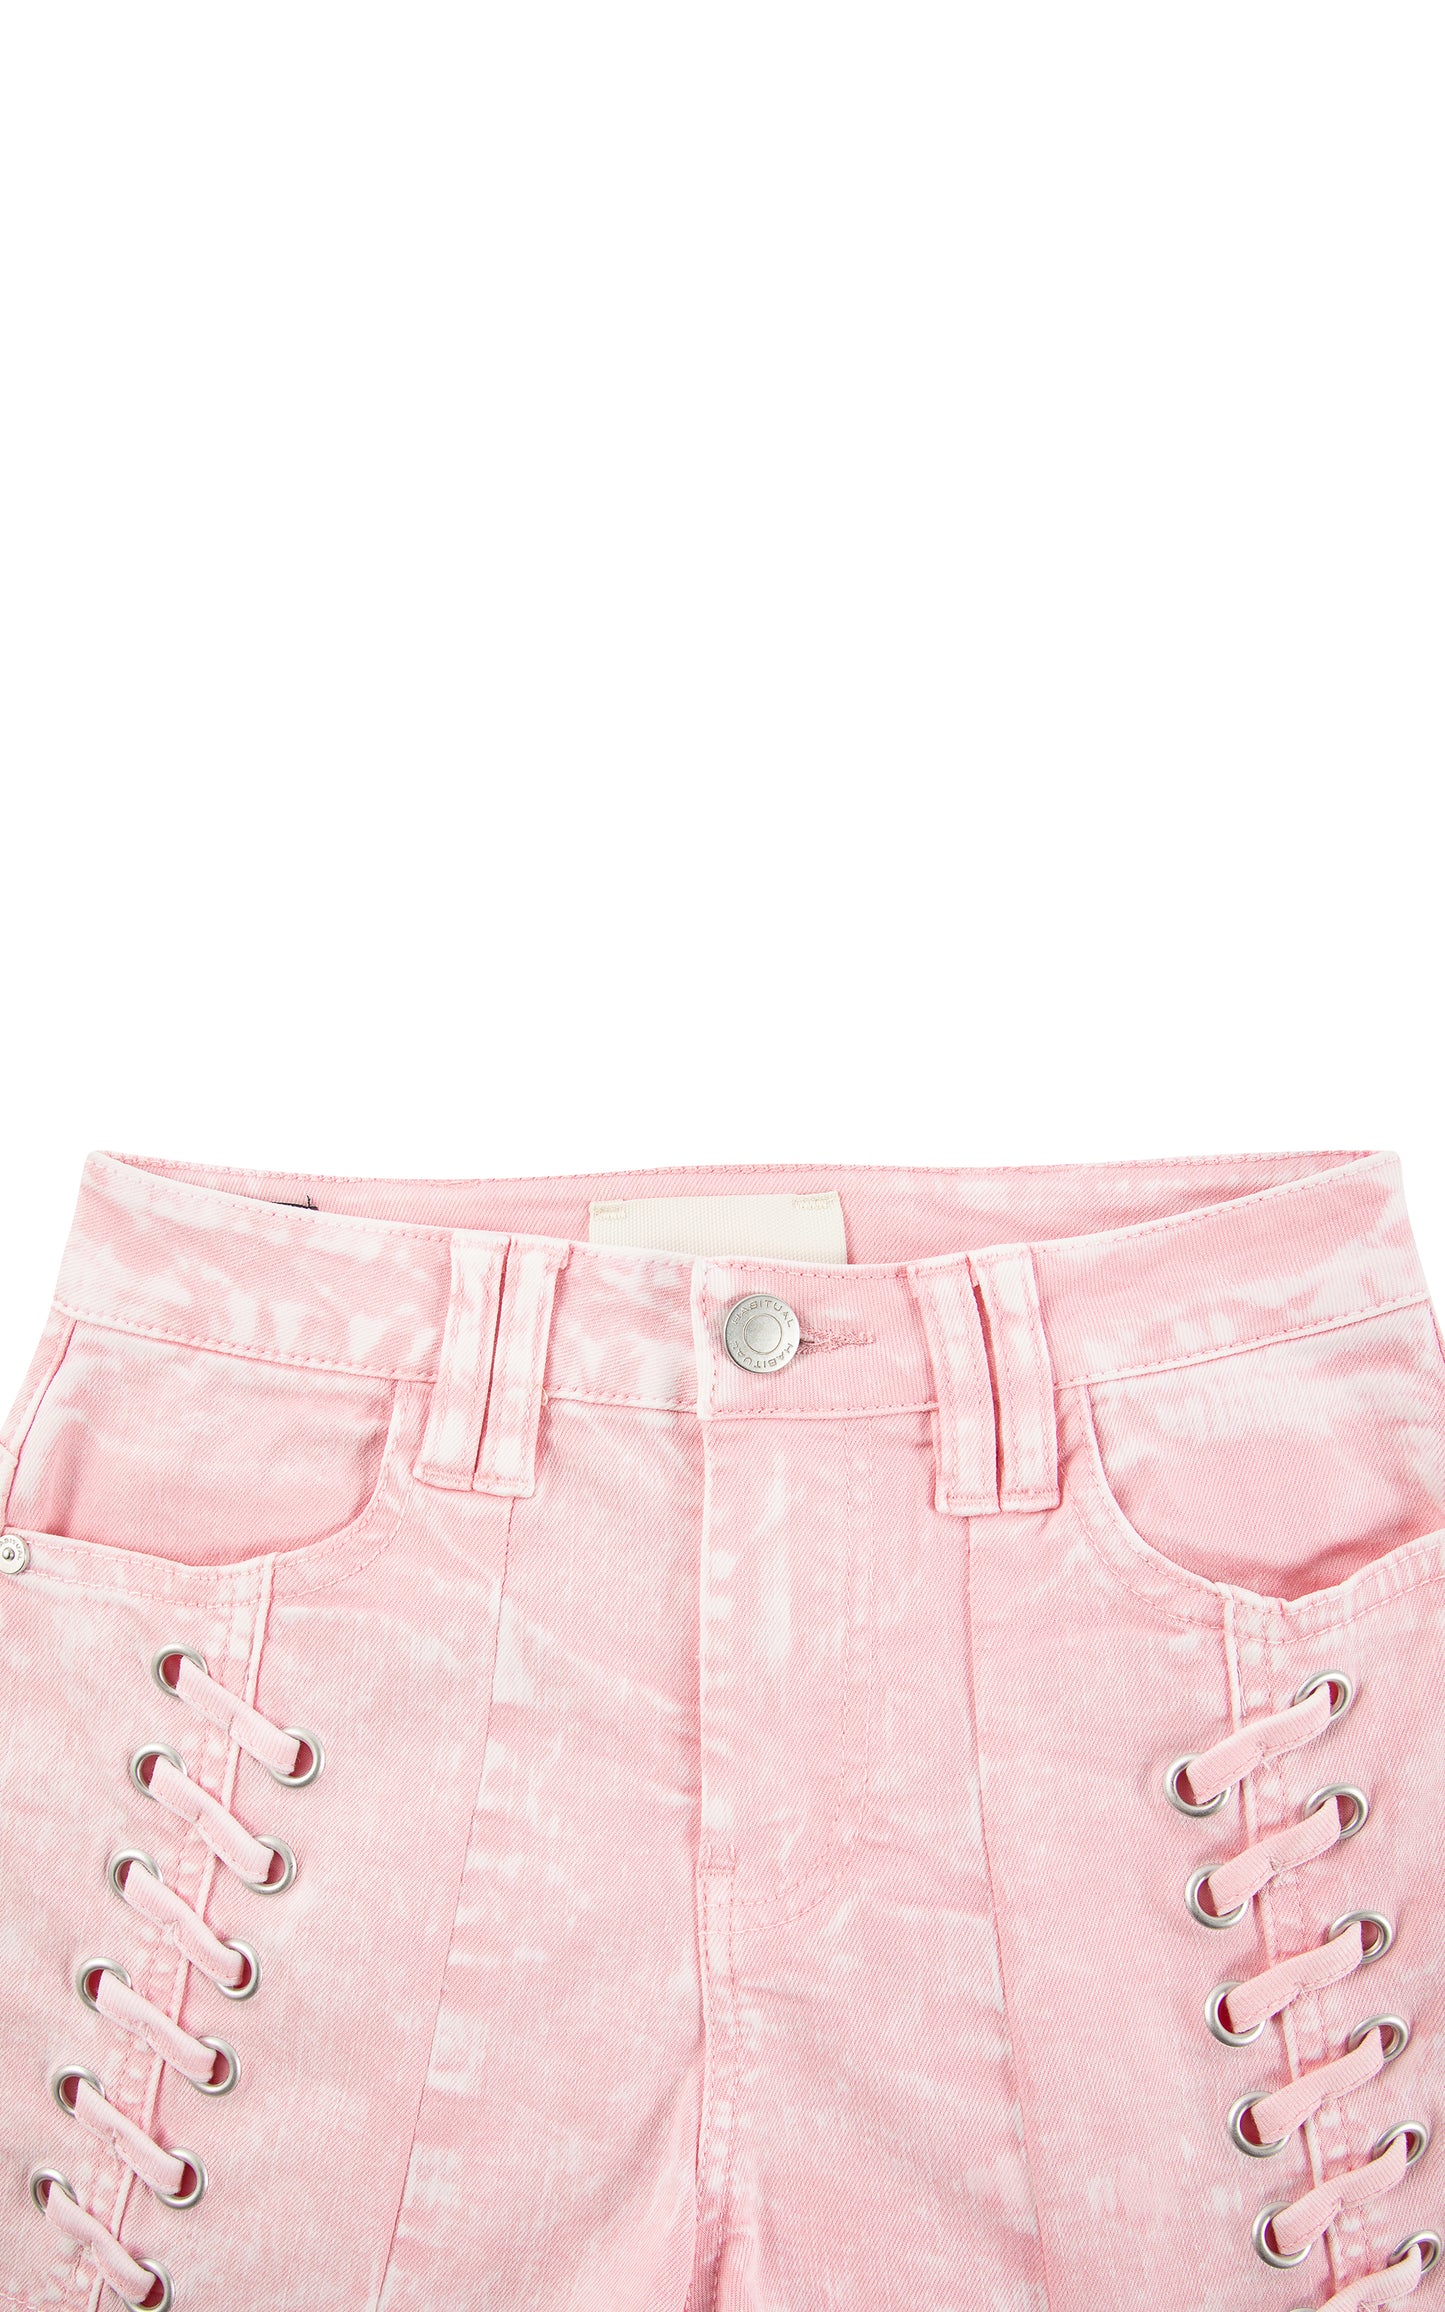 Close up of pink denim lace front shorts